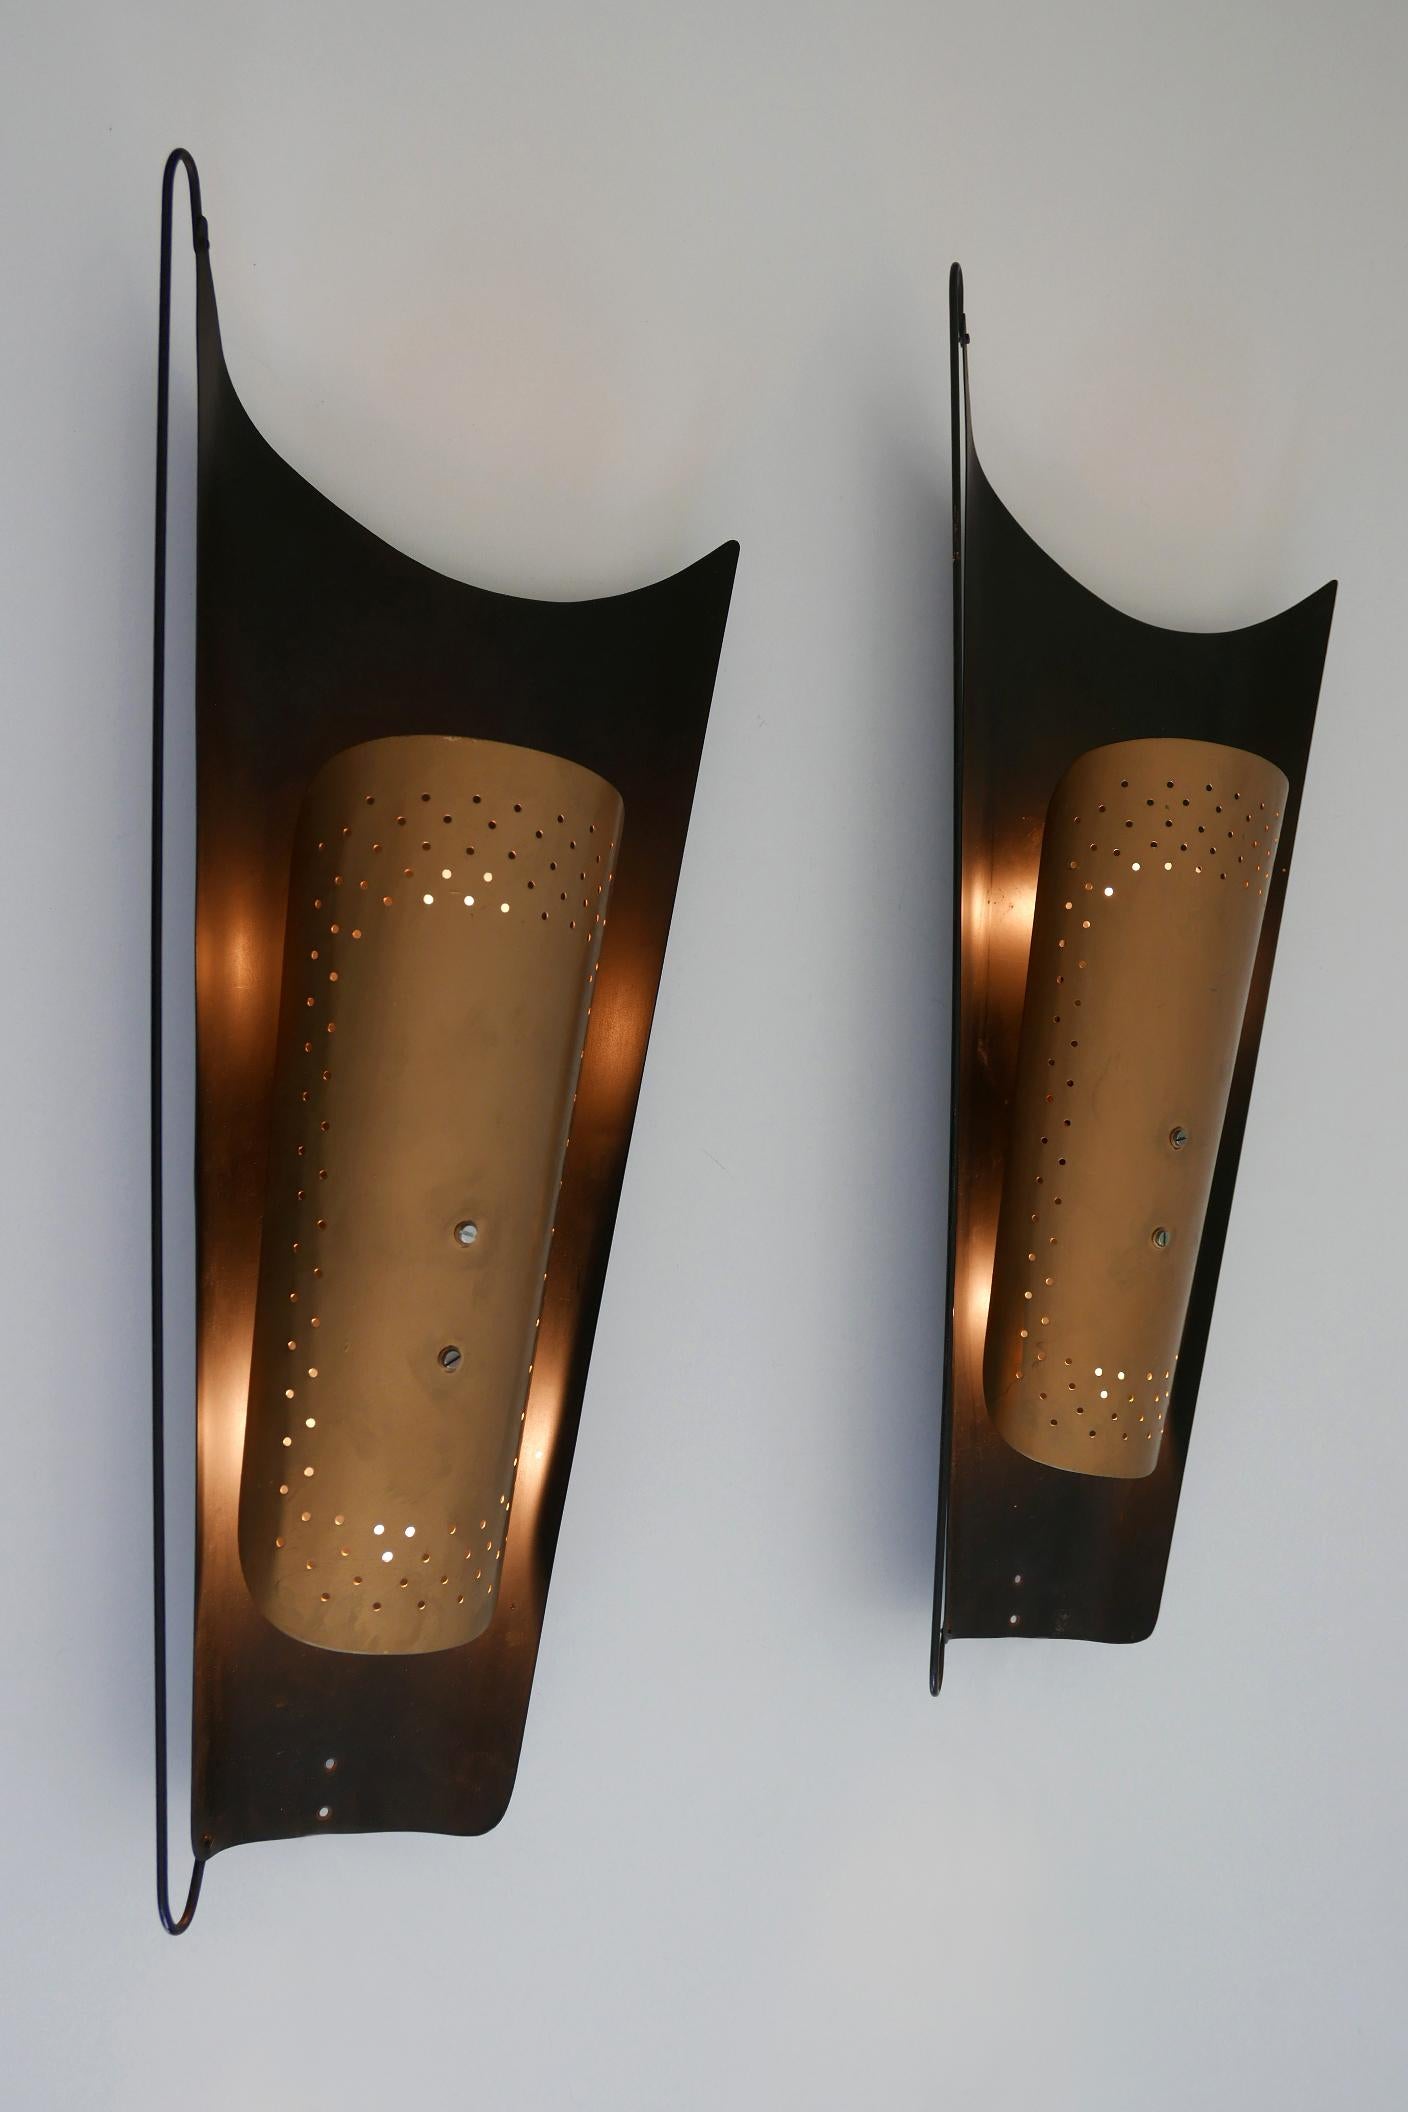 Set of Two Huge Mid-Century Modern Wall Lamps or Sconces, 1950s, Germany For Sale 4